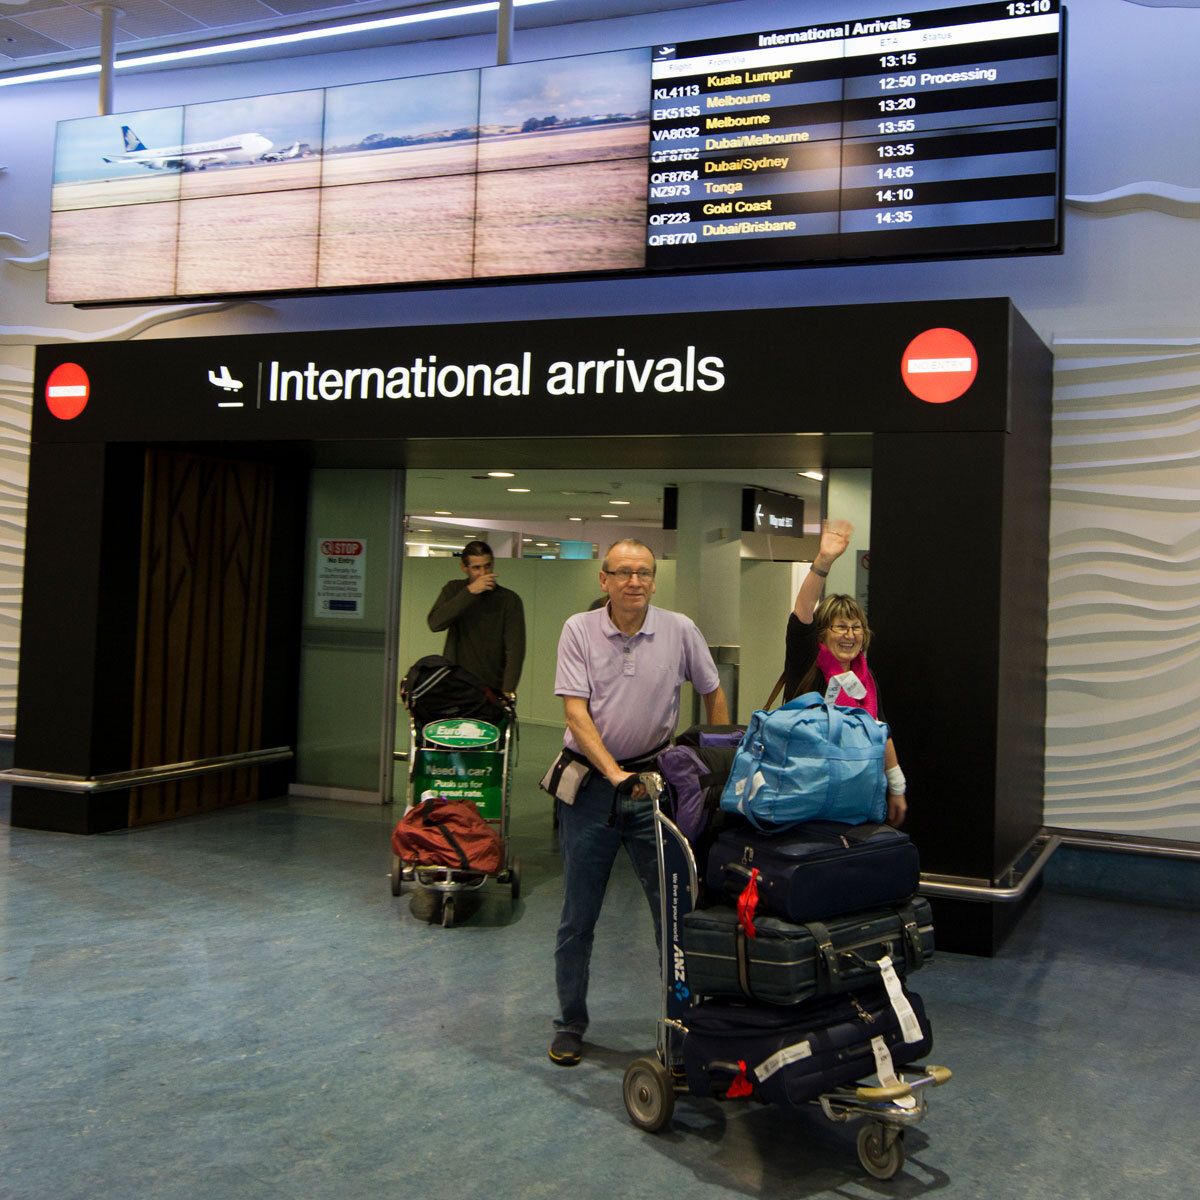 Couple arriving at Auckland airport international arrivals gate